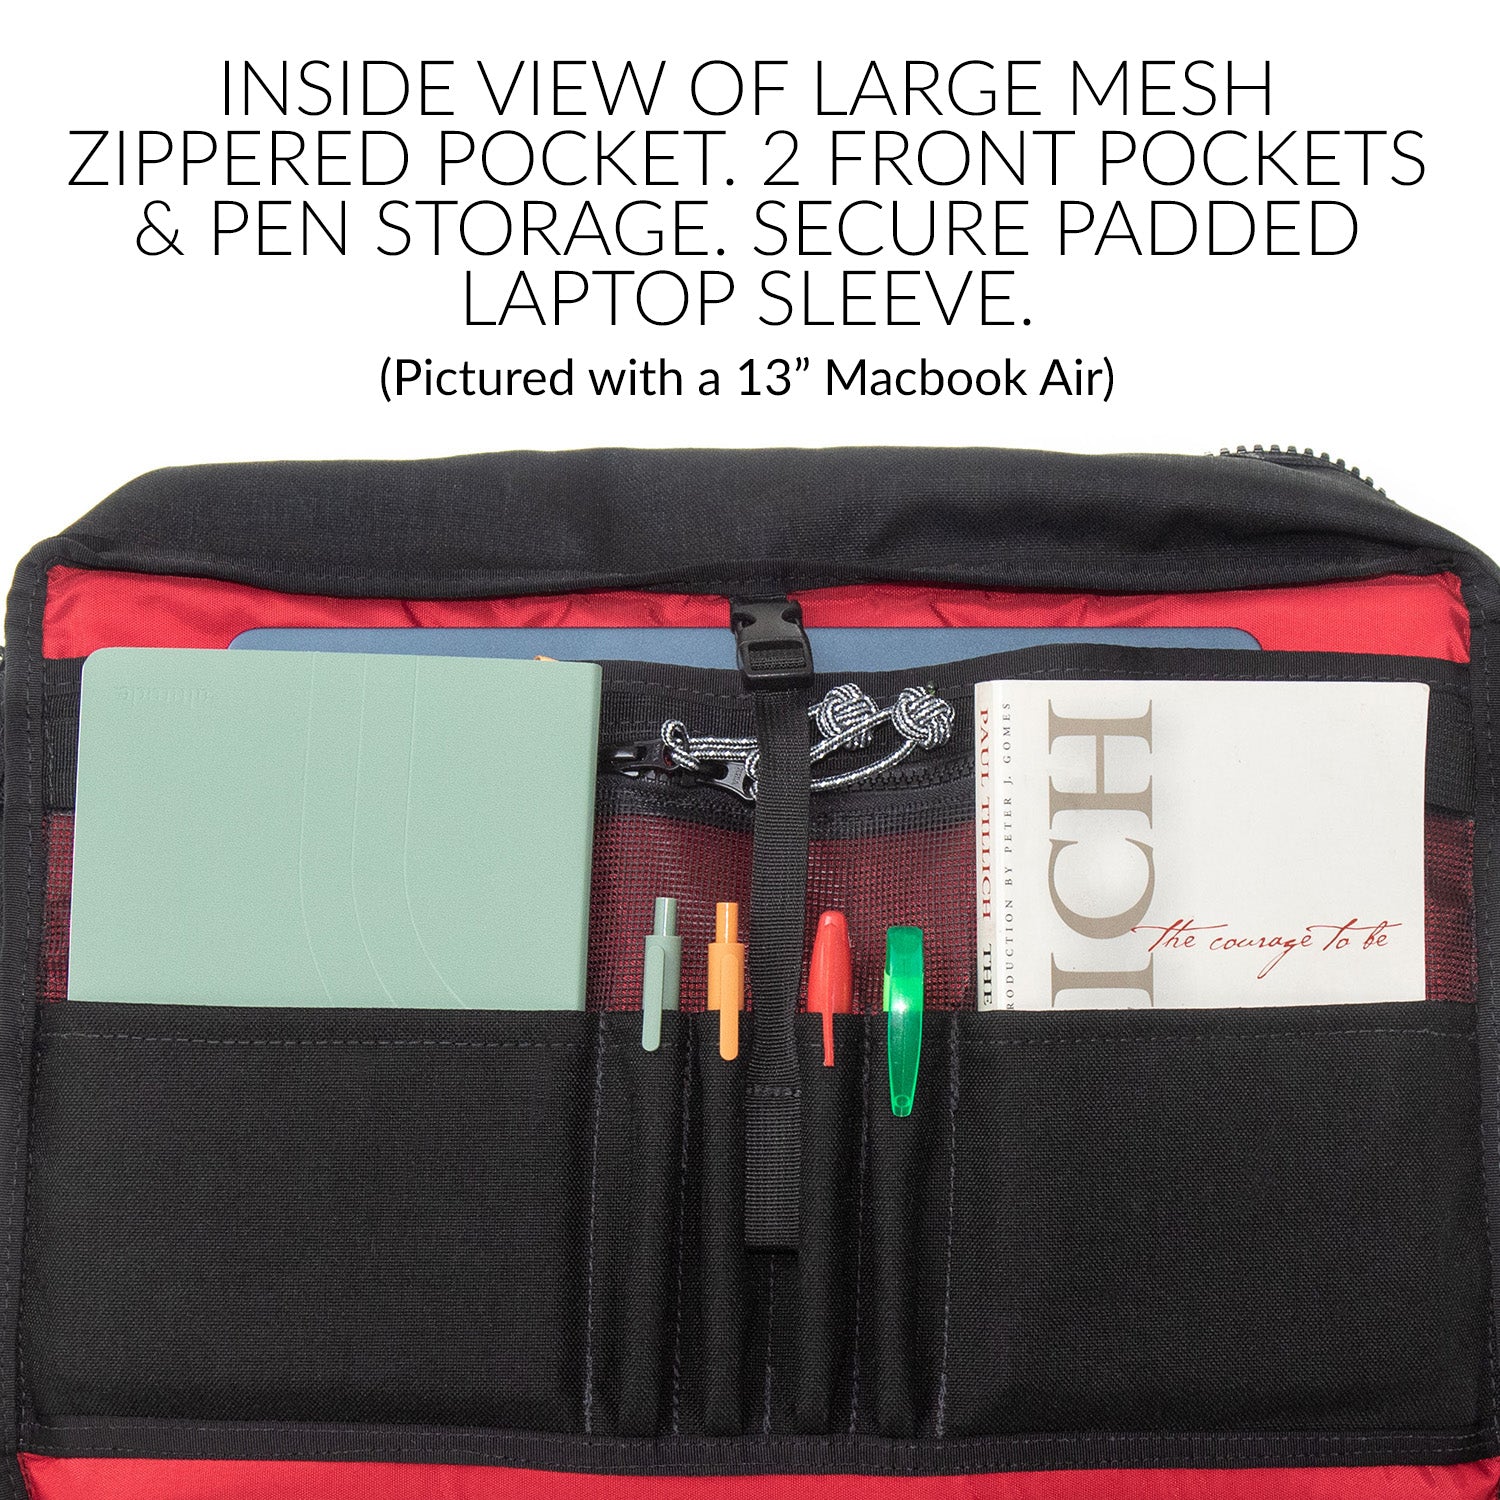 Inside view of the large mesh zippered pocket. 2 front pockets & pen storage.  Secure padded laptop sleeve. pictured with a 13 inch Macbook Air.